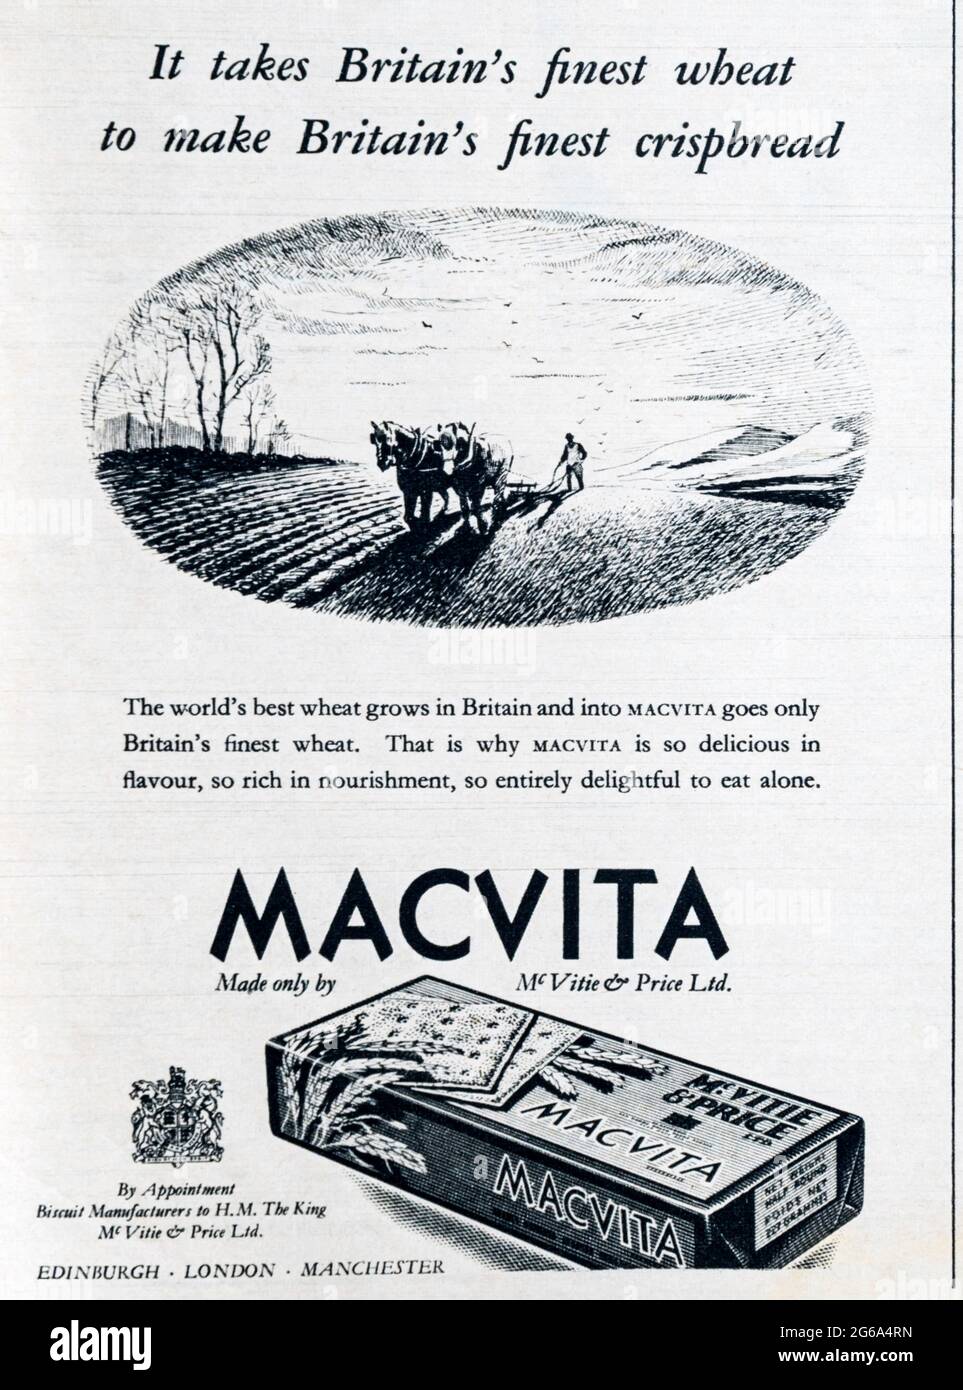 A 1950s magazine advertisement for Macvita biscuits made from British wheat by McVitie & Price. Stock Photo